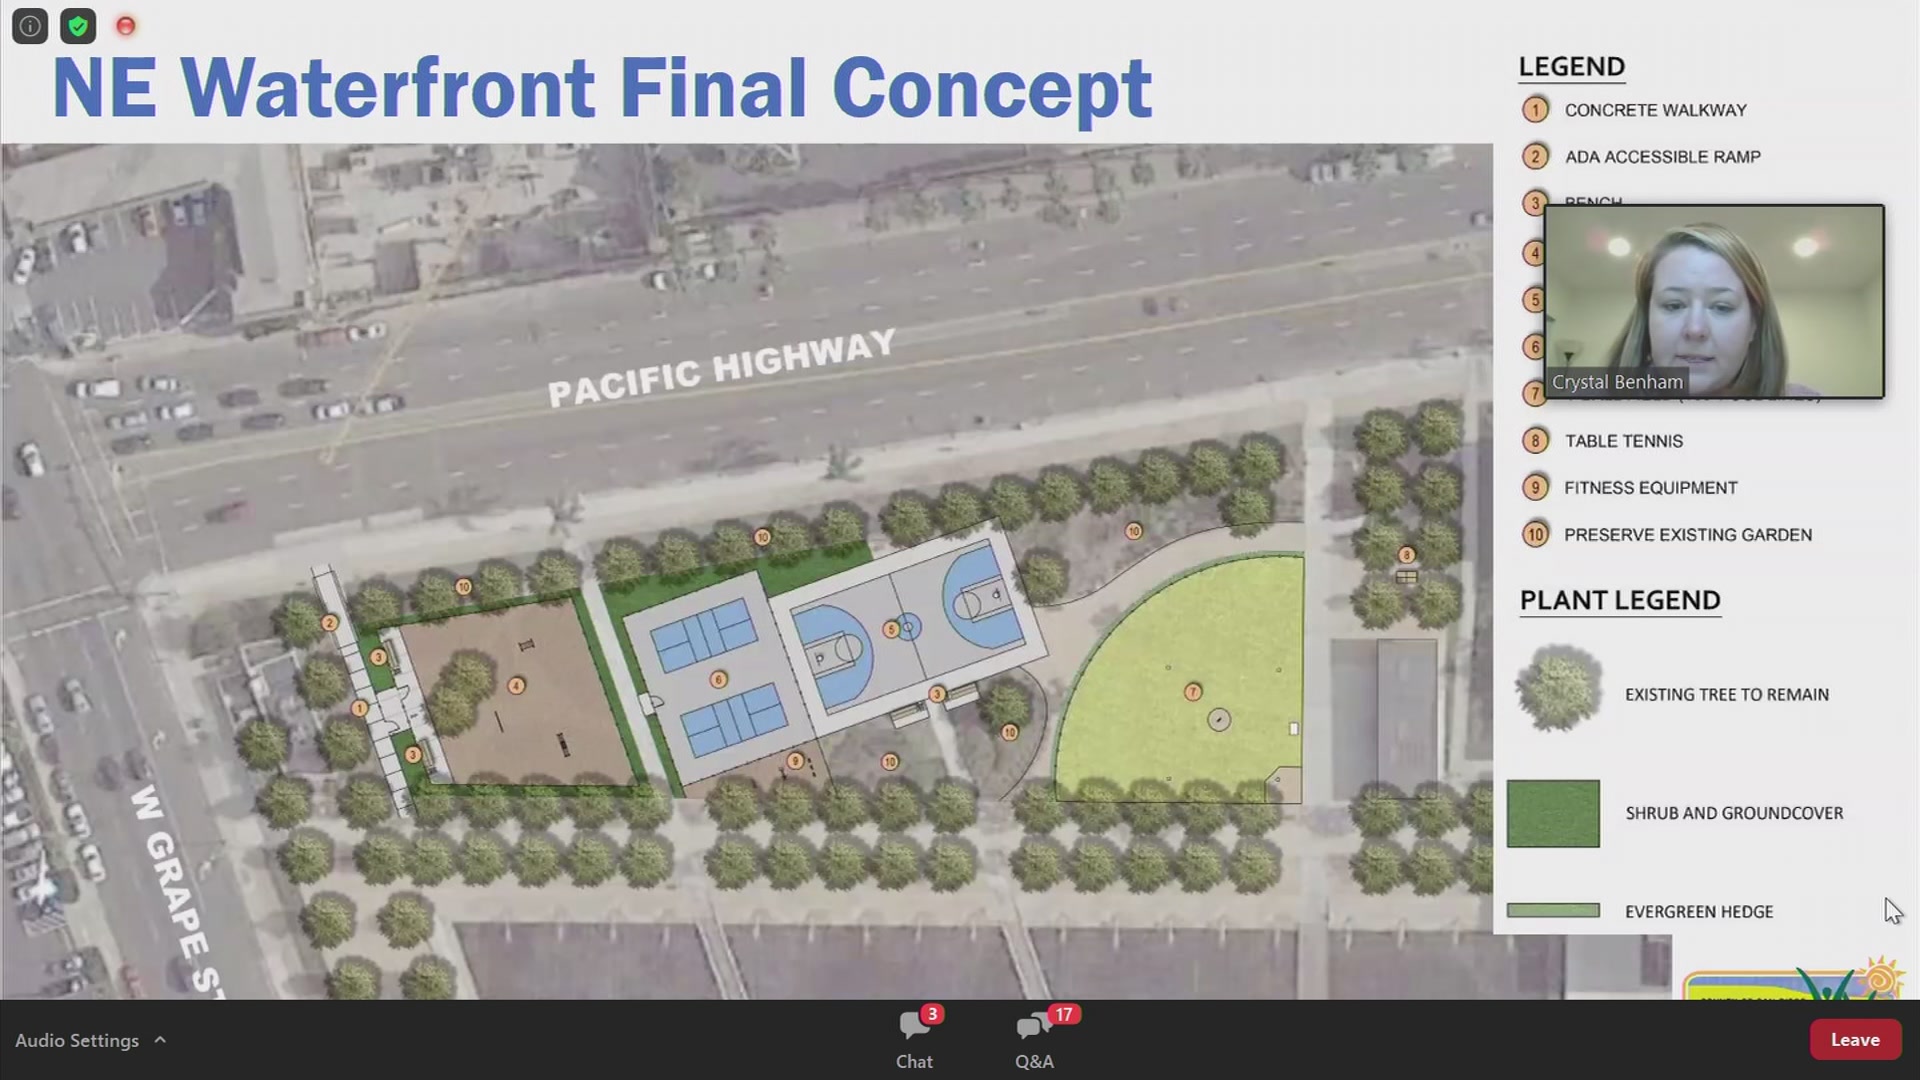 Proposed amendments would allow for development near Waterfront Park